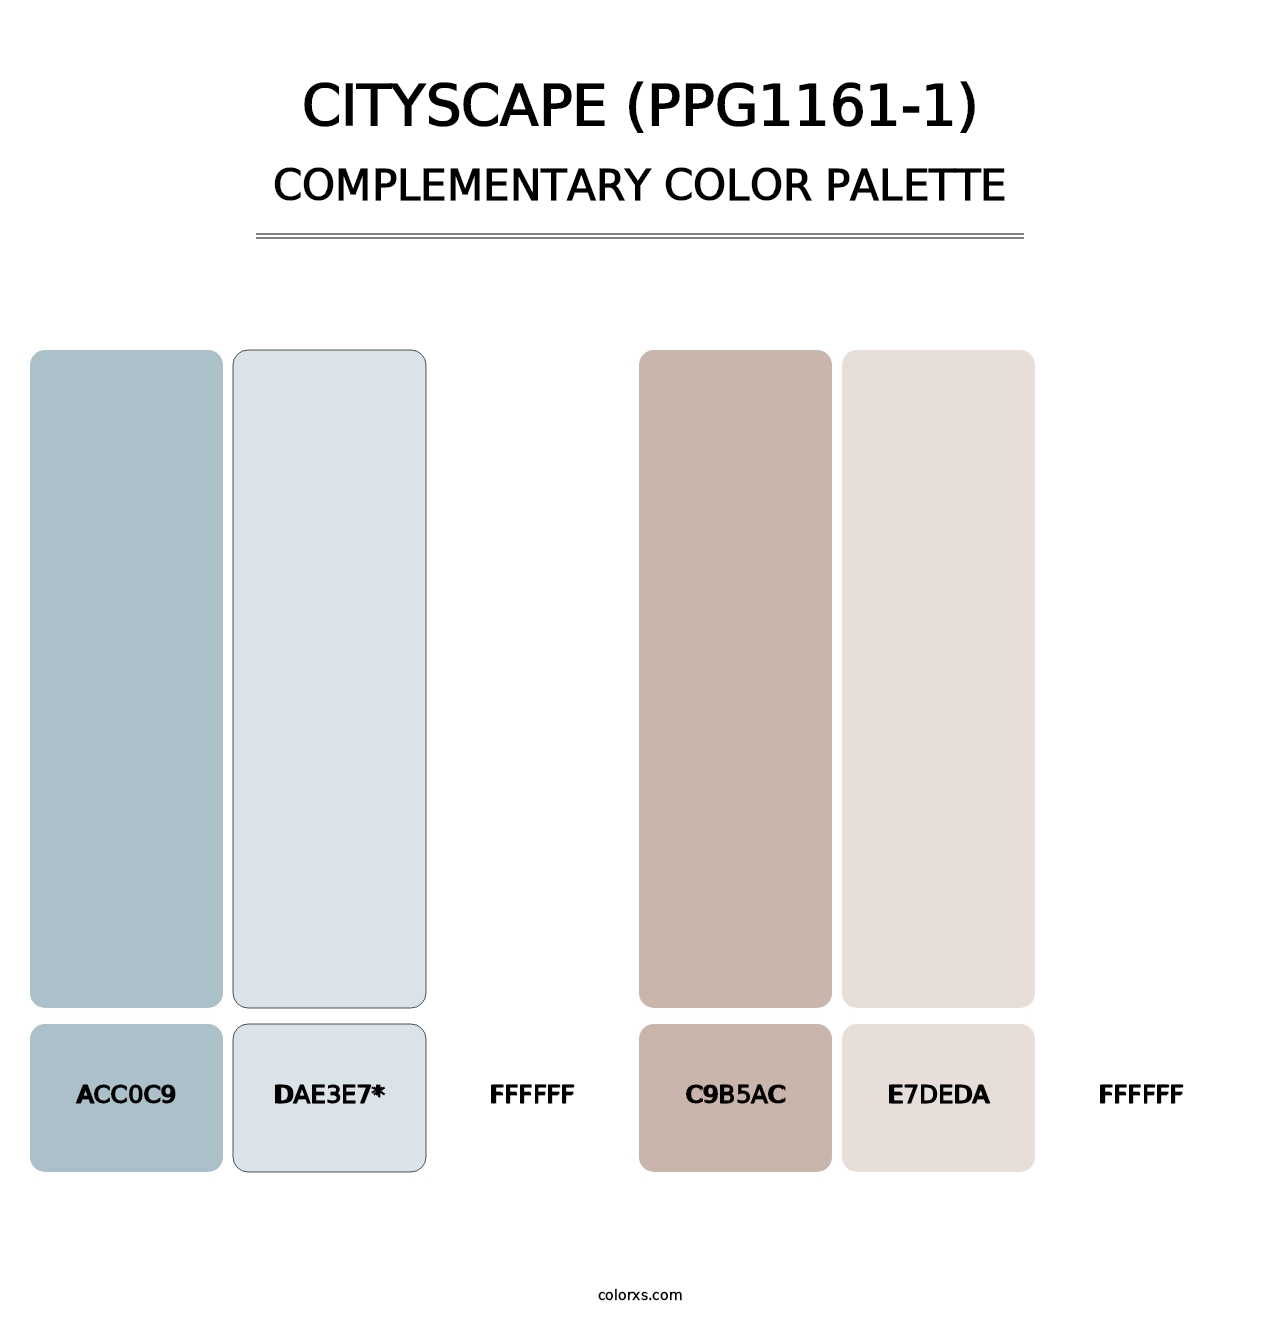 Cityscape (PPG1161-1) - Complementary Color Palette